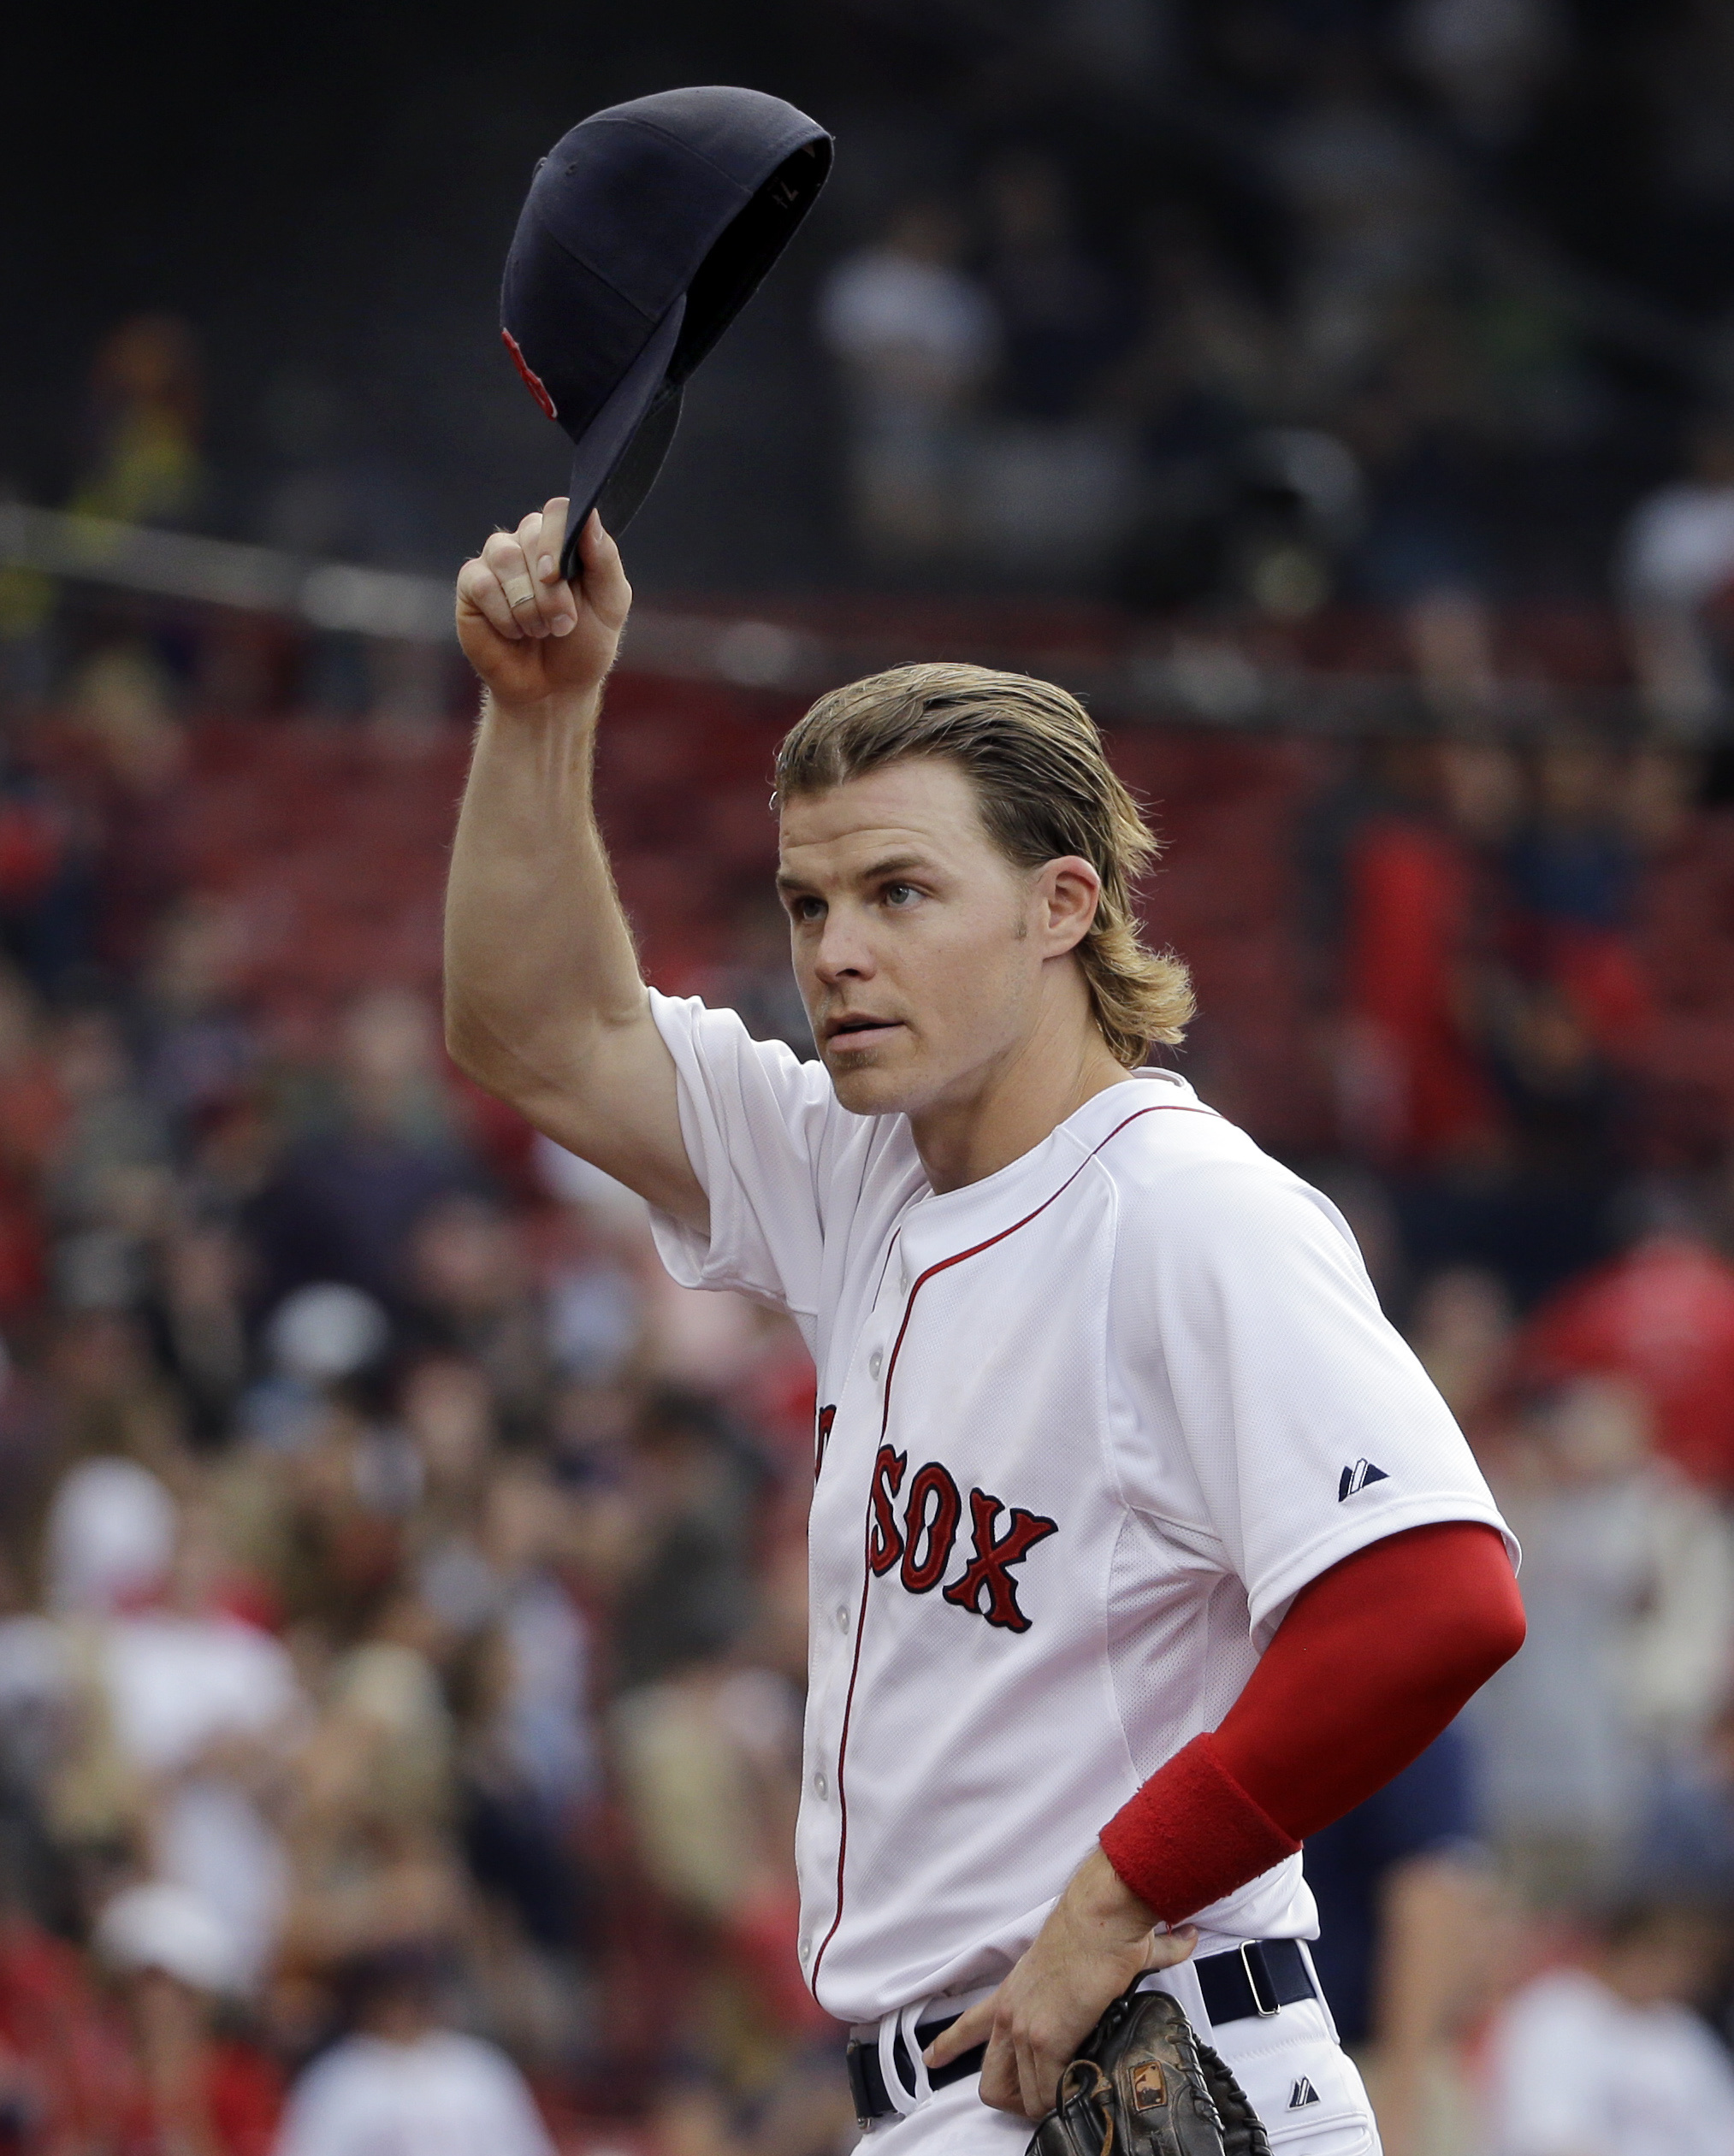 Brock Holt in his white and red Boston uniform while taking his cap off